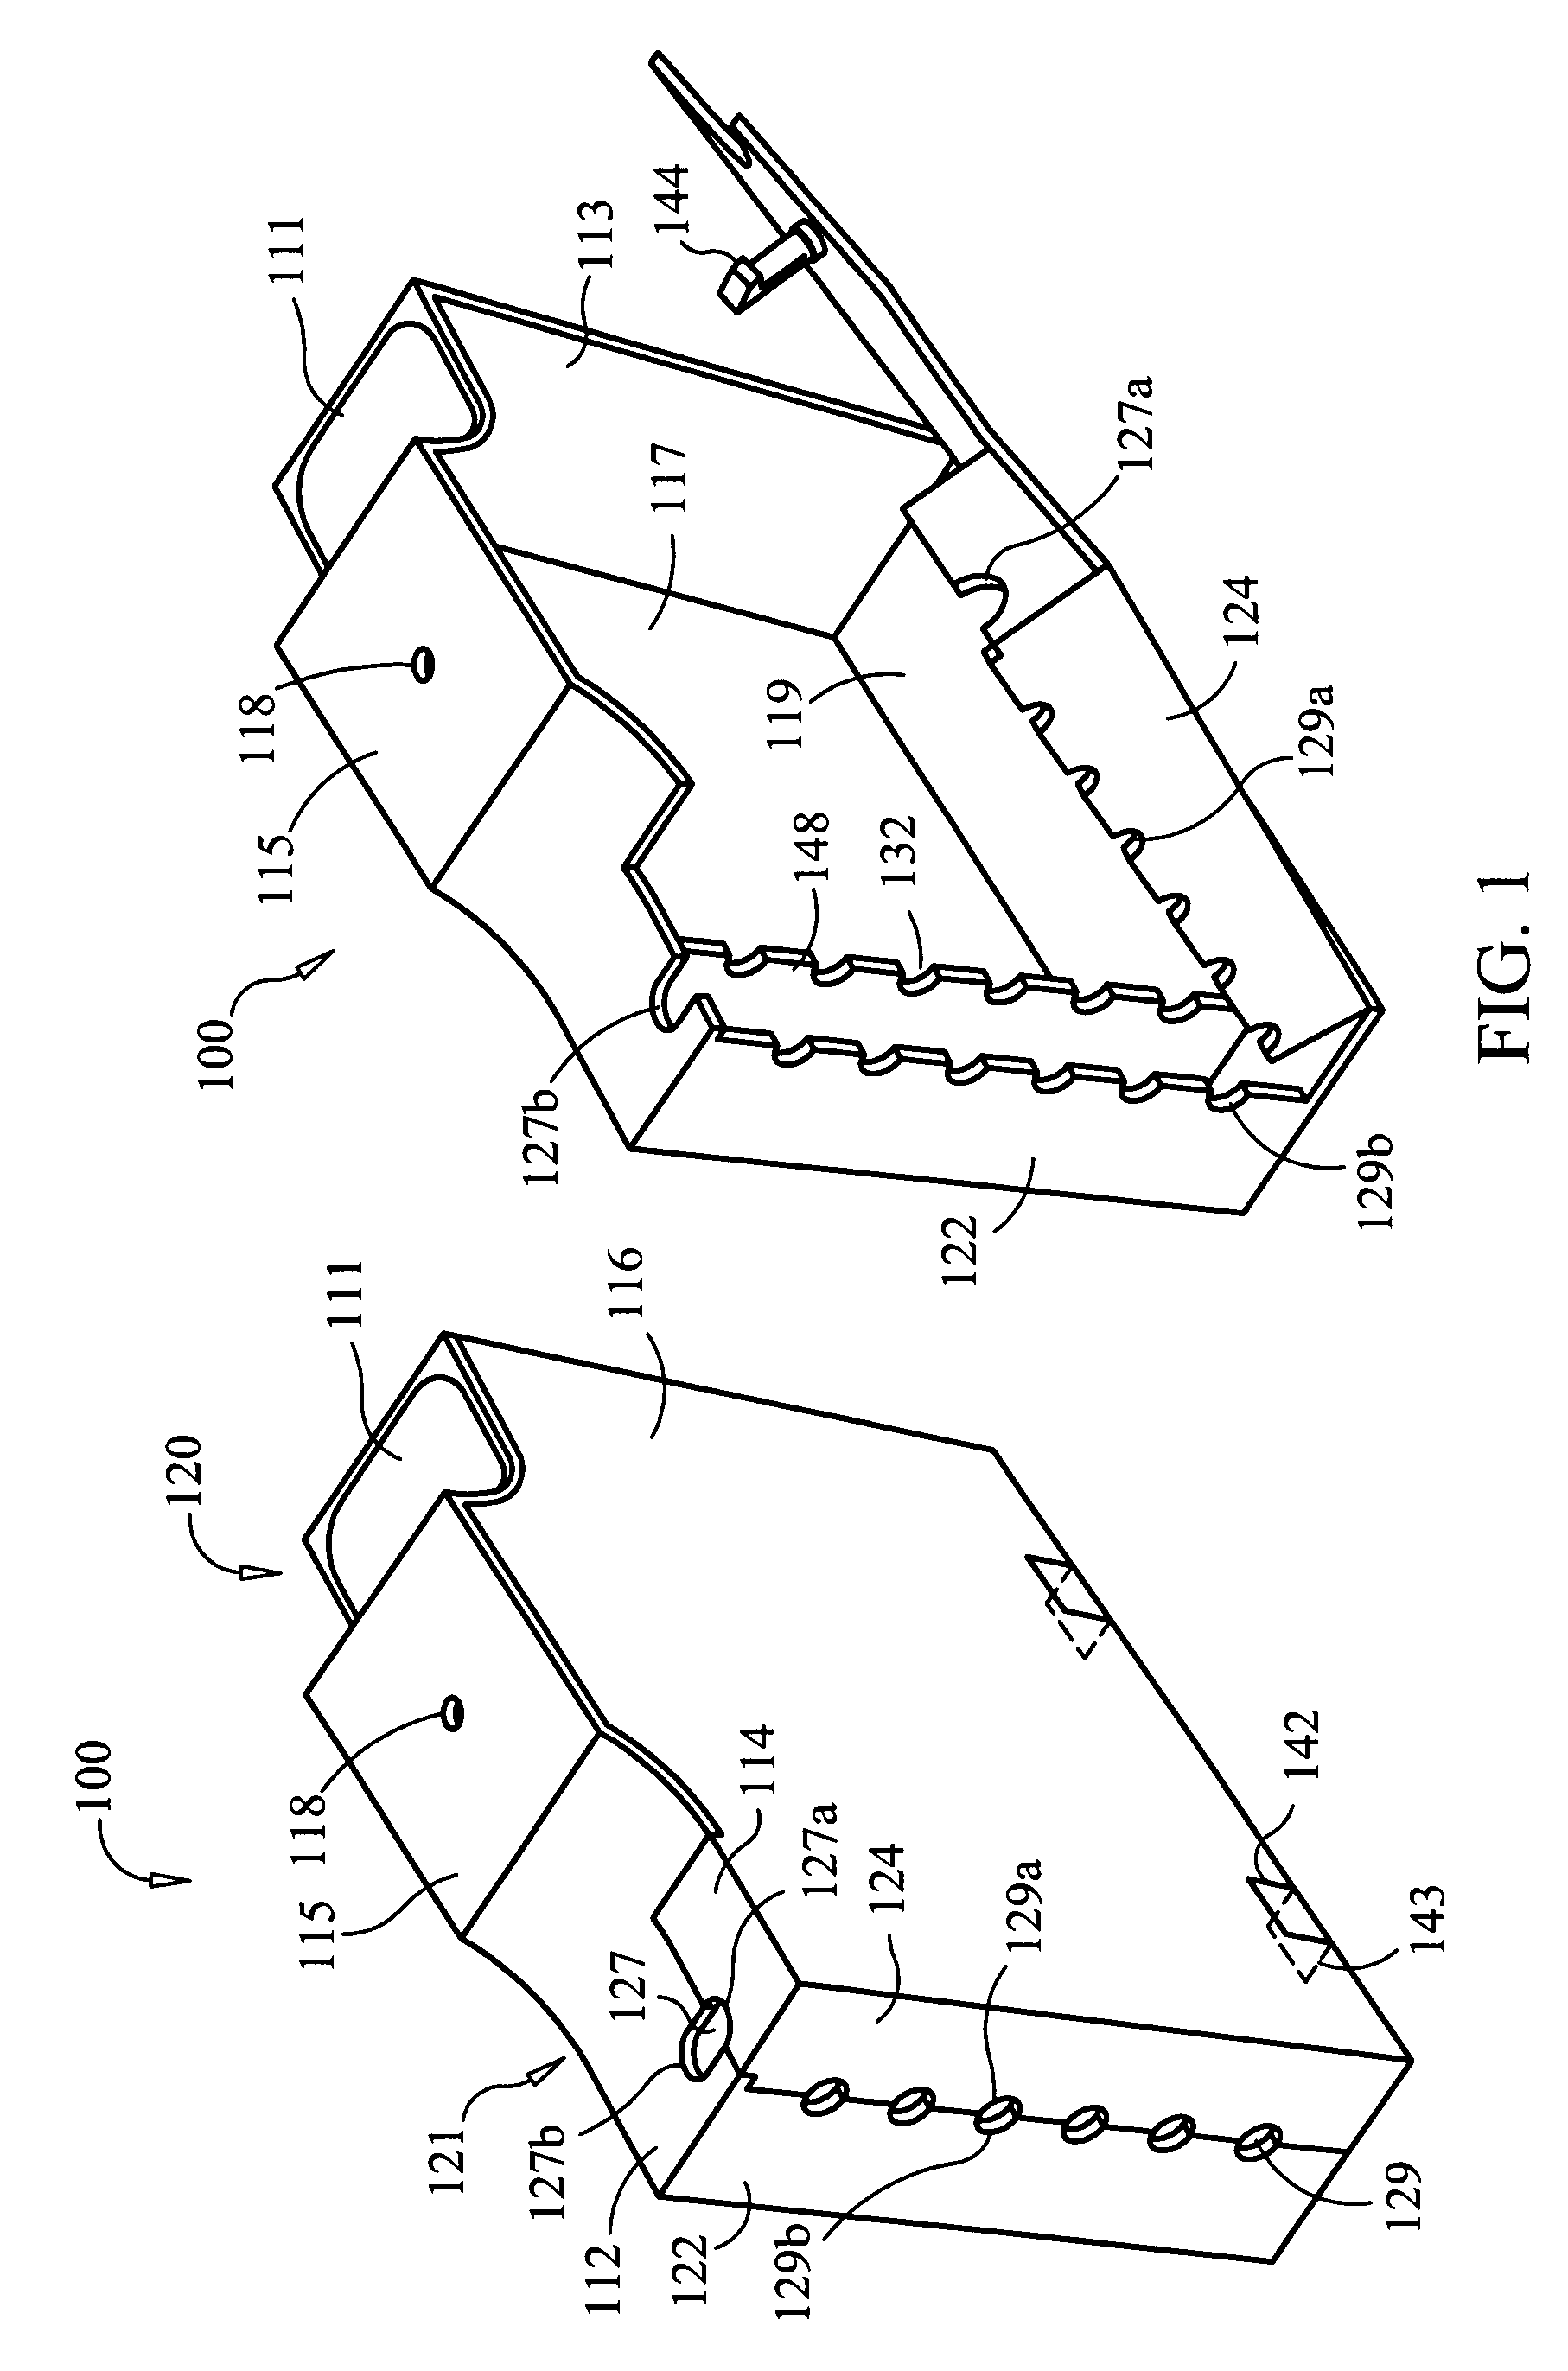 Electronic device charging platform and portable electrical outlet enclosure